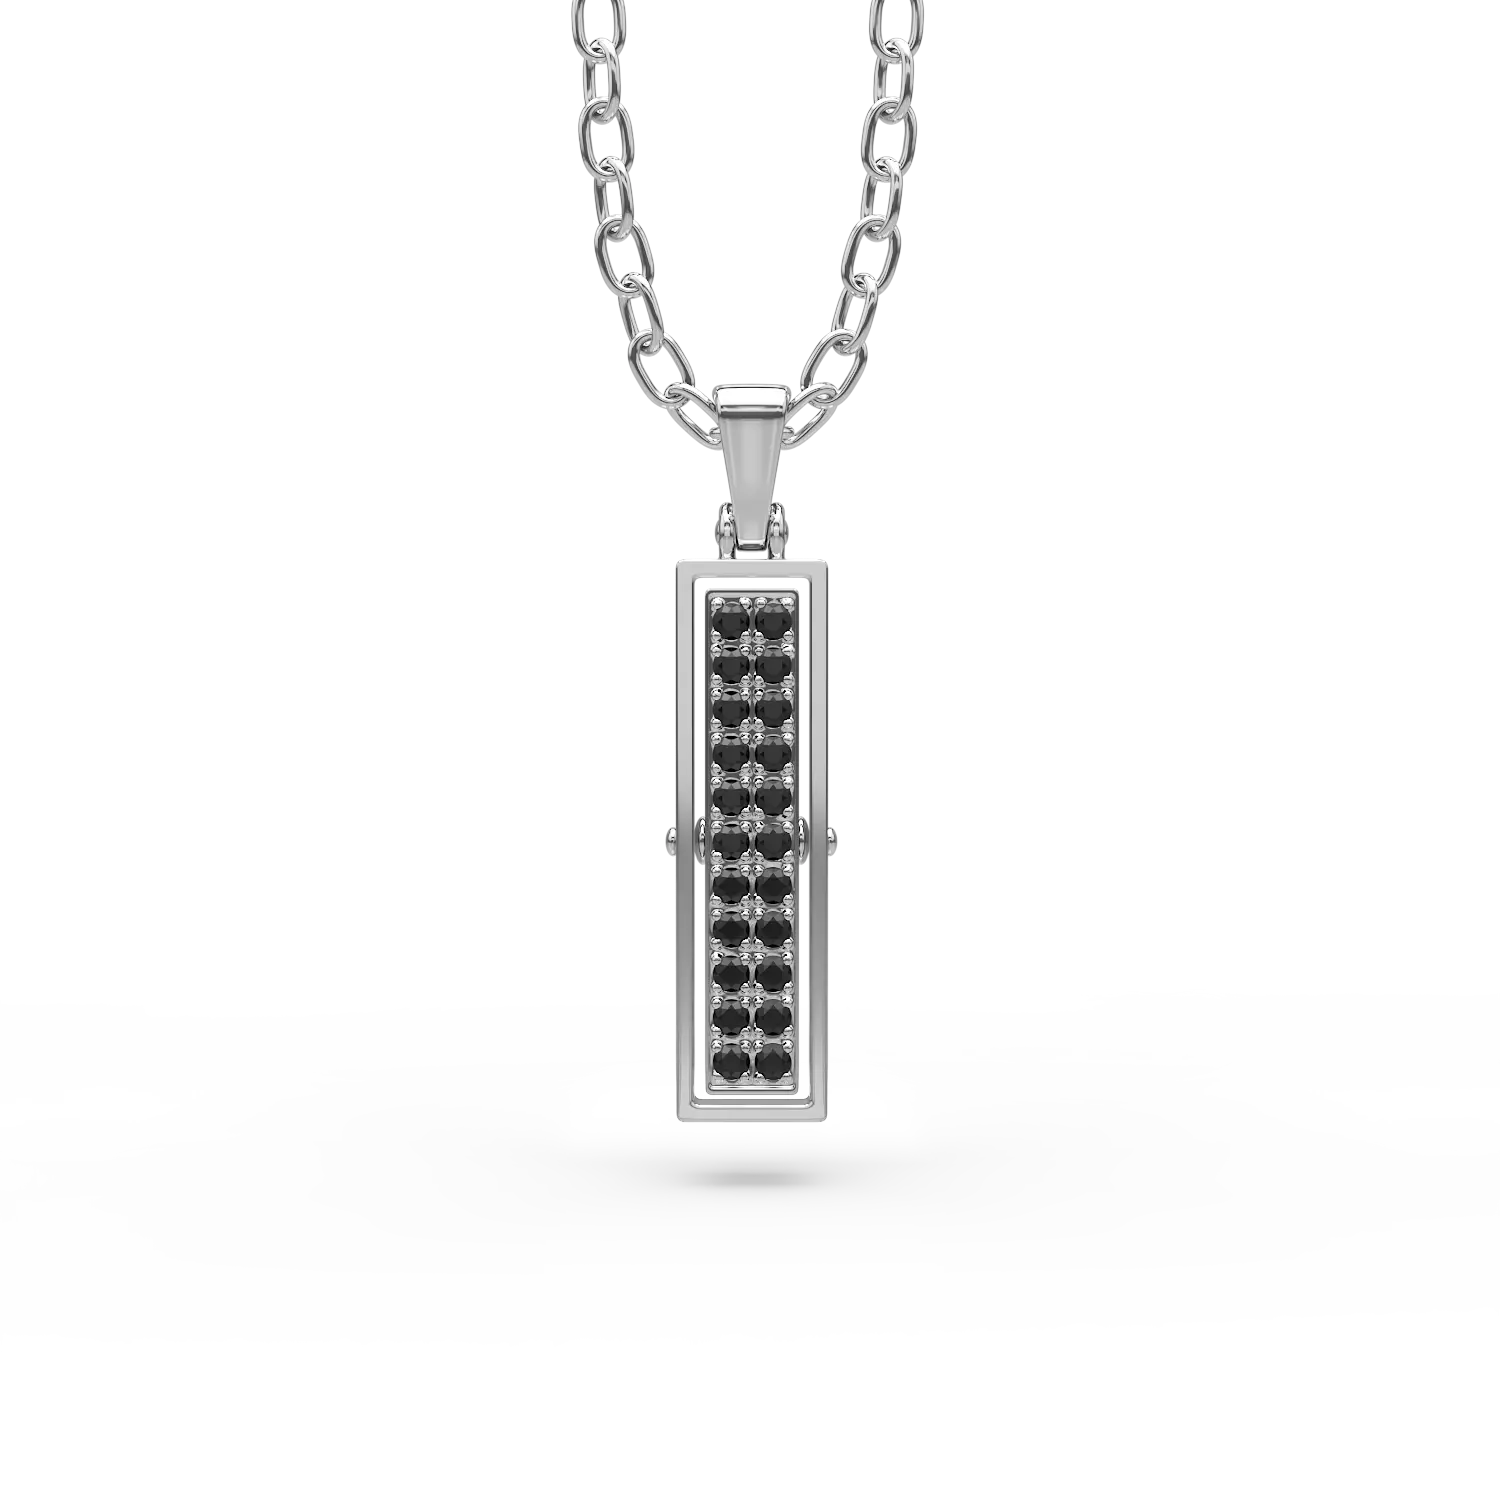 Silver Towers pendant necklace